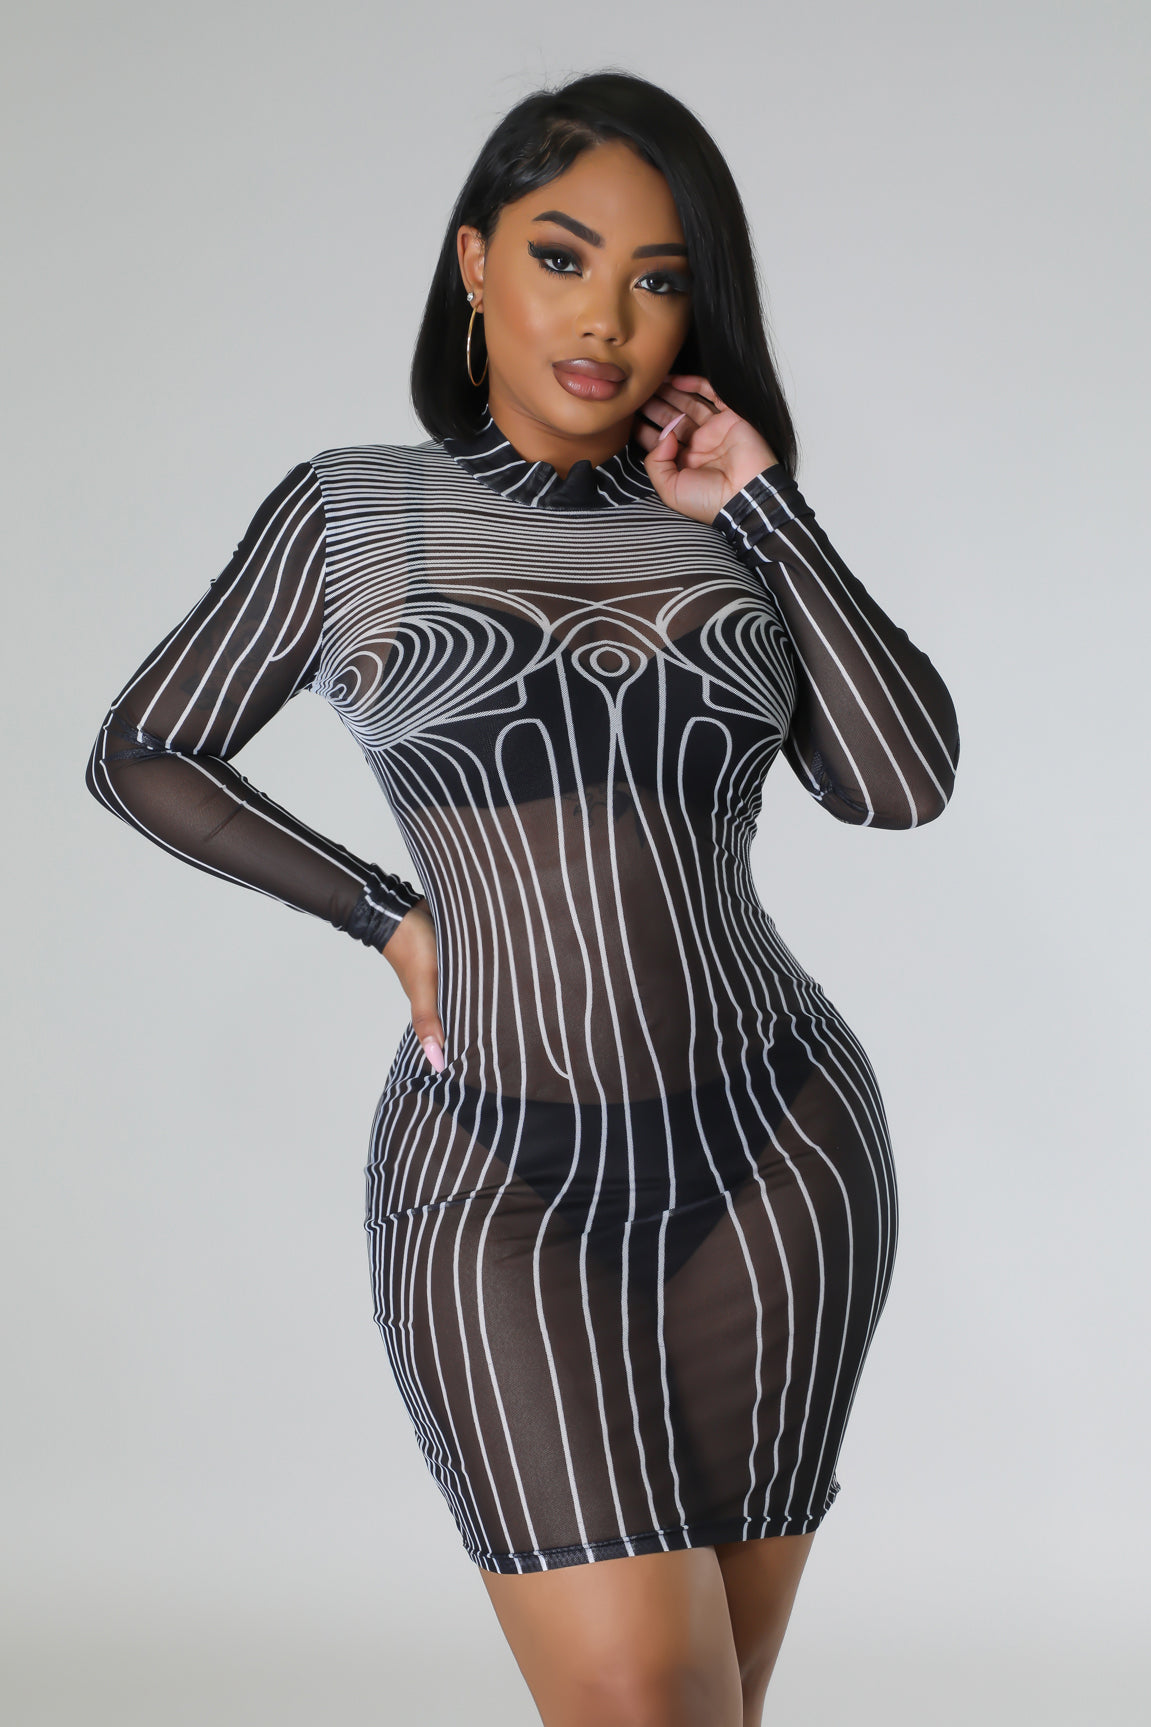 BLACK AND WHITE BODY LINES DRESS